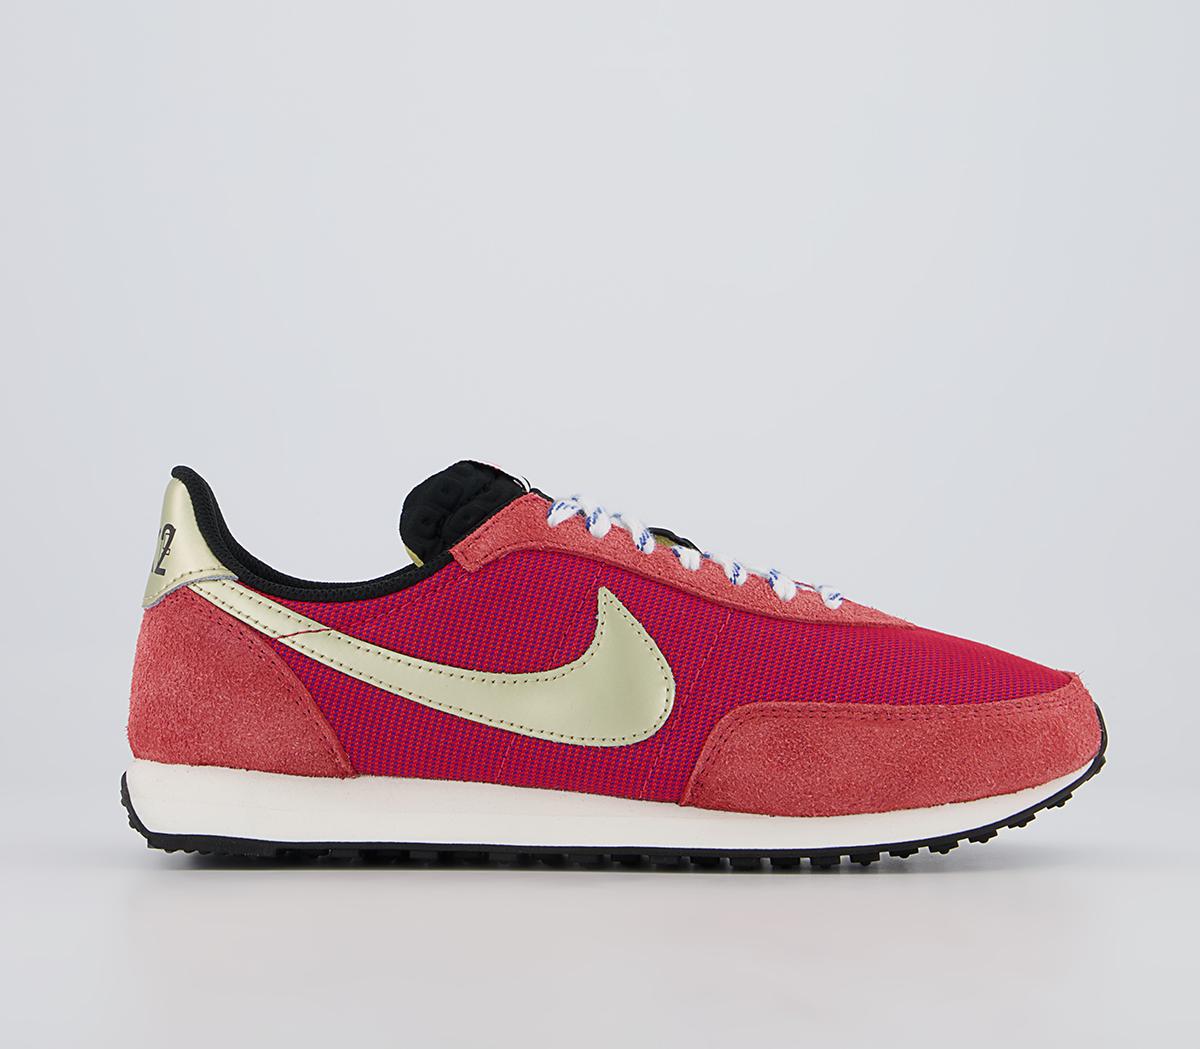 NikeWaffle 2 TrainersGym Red Metallic Gold Star Hyper